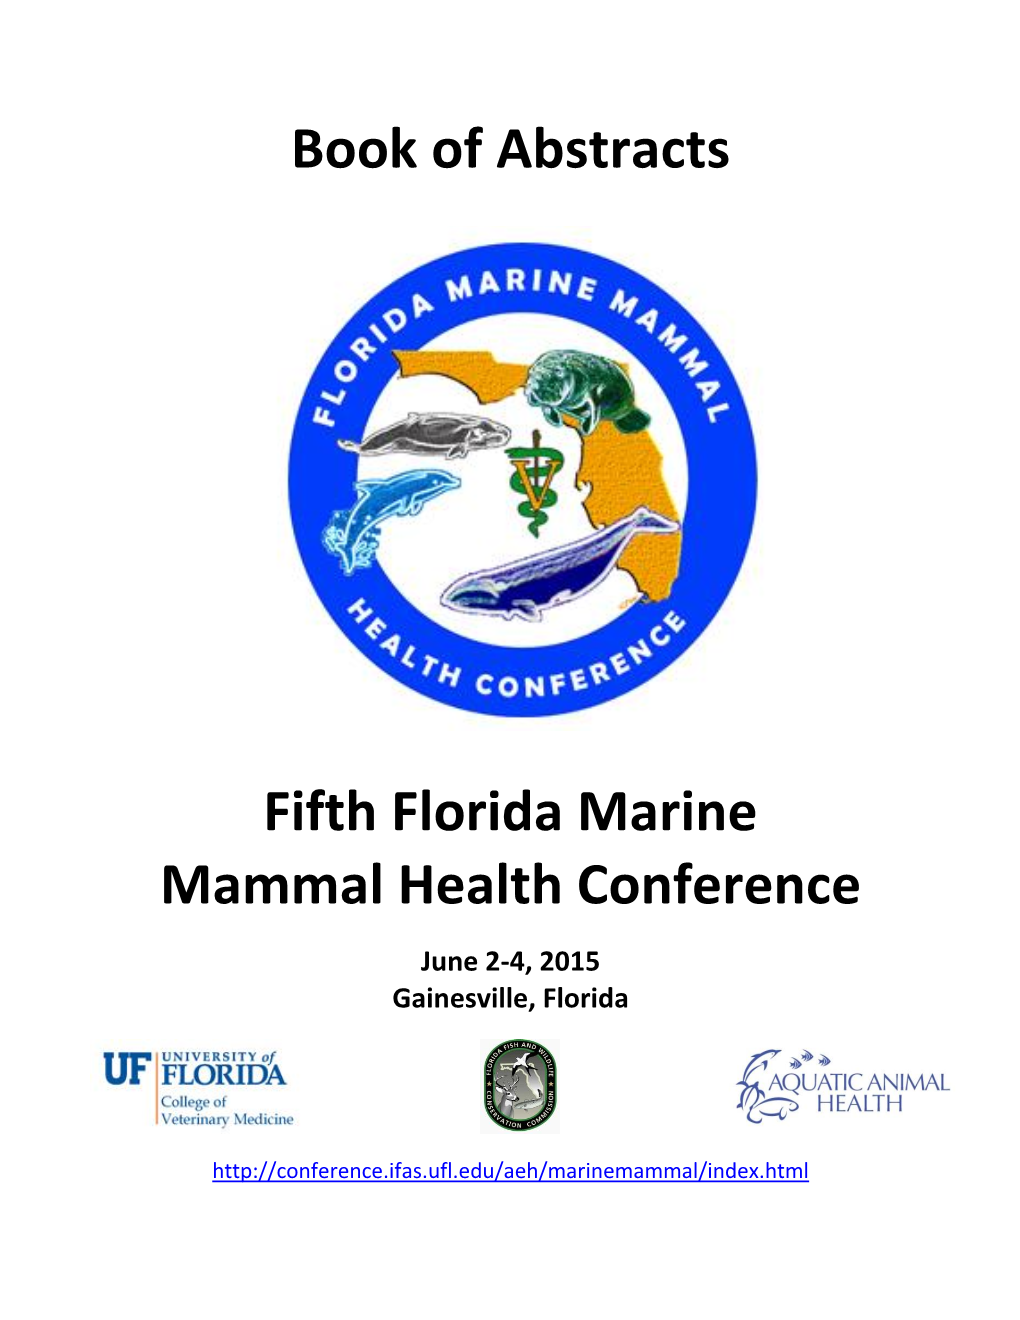 Book of Abstracts Fifth Florida Marine Mammal Health Conference